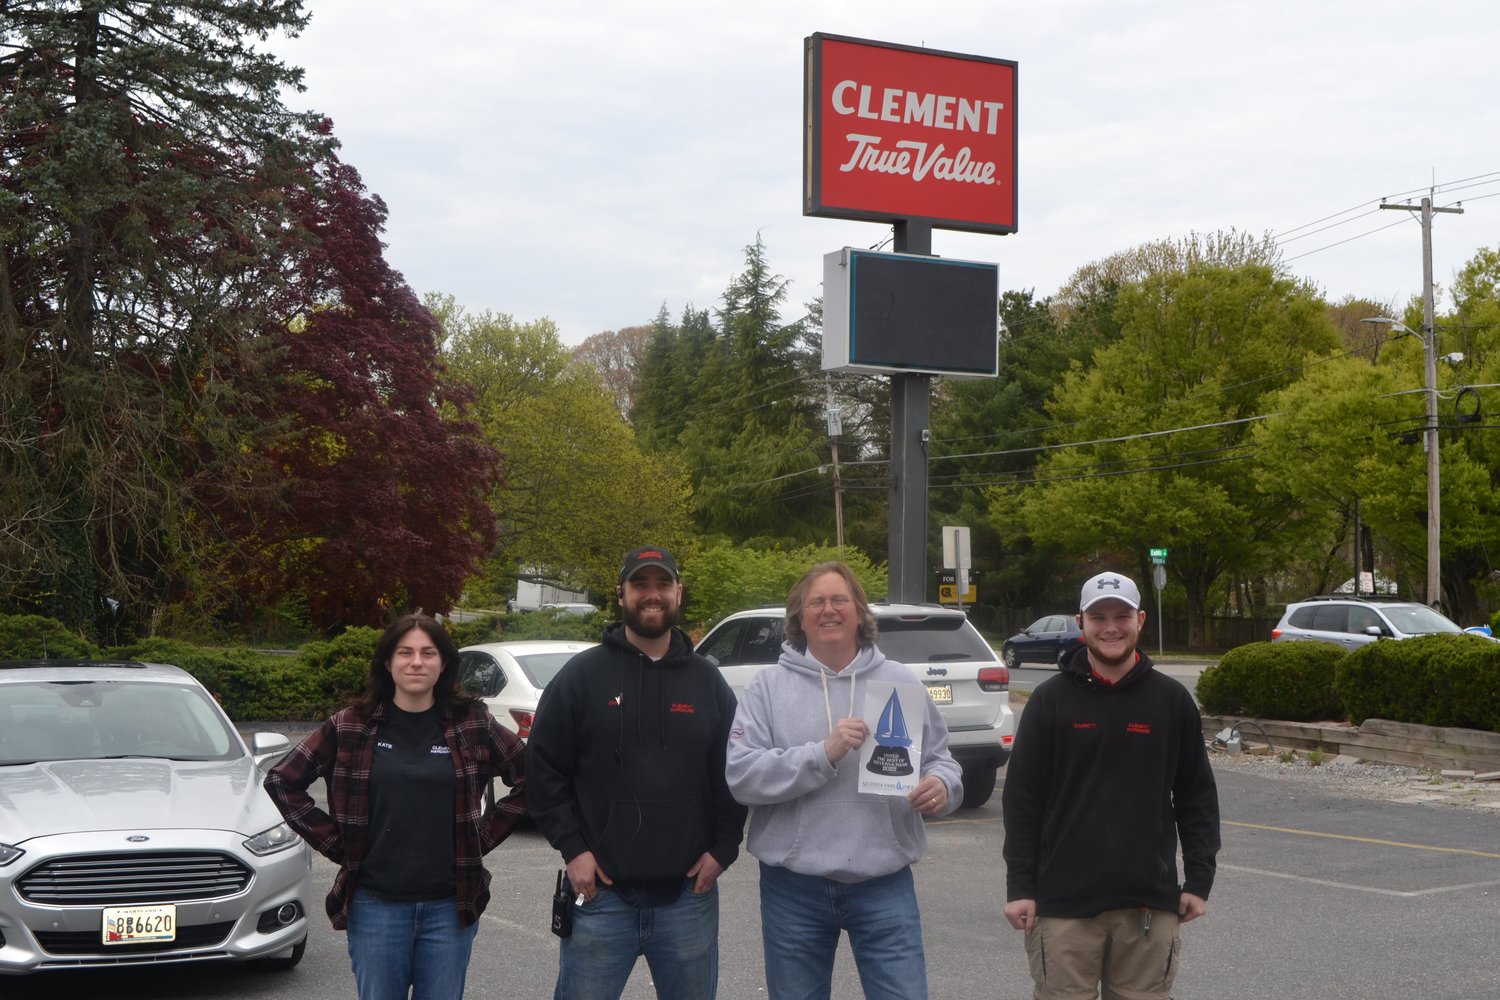 Clement Hardware was voted Best Hardware Store.